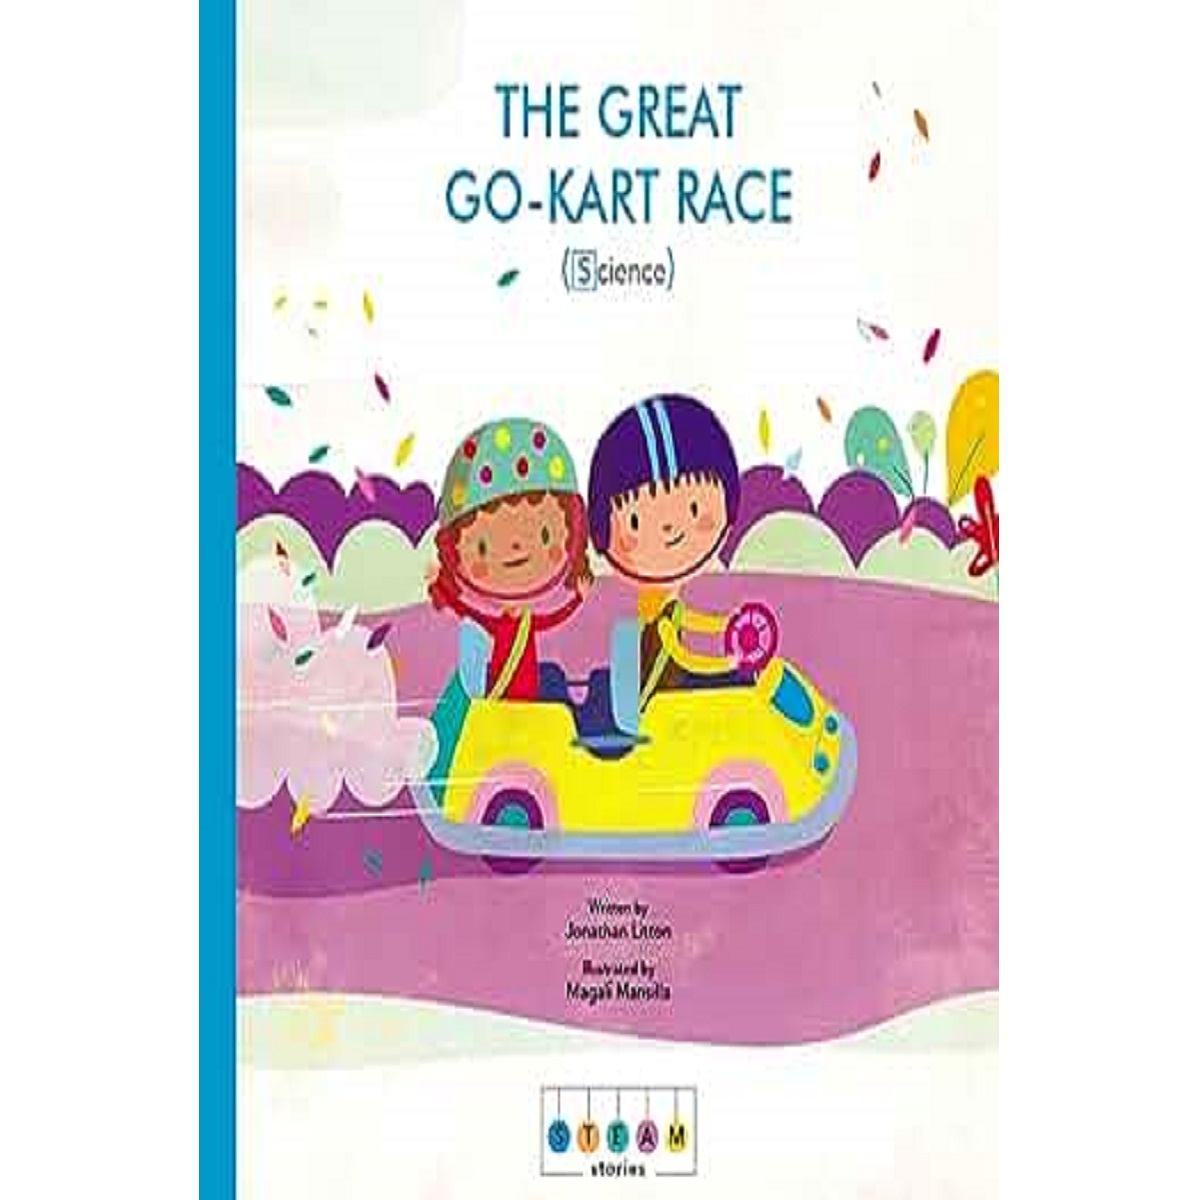 Max and Suzy are entered in the Great Go-kart Race and all is going well until… they get stuck in the mud! Help them overcome several obstacles en route, such as a punctured tyre and a flat battery, in this fun, interactive science story! Will the dynamic duo find the solutions to all the problems and win the race?